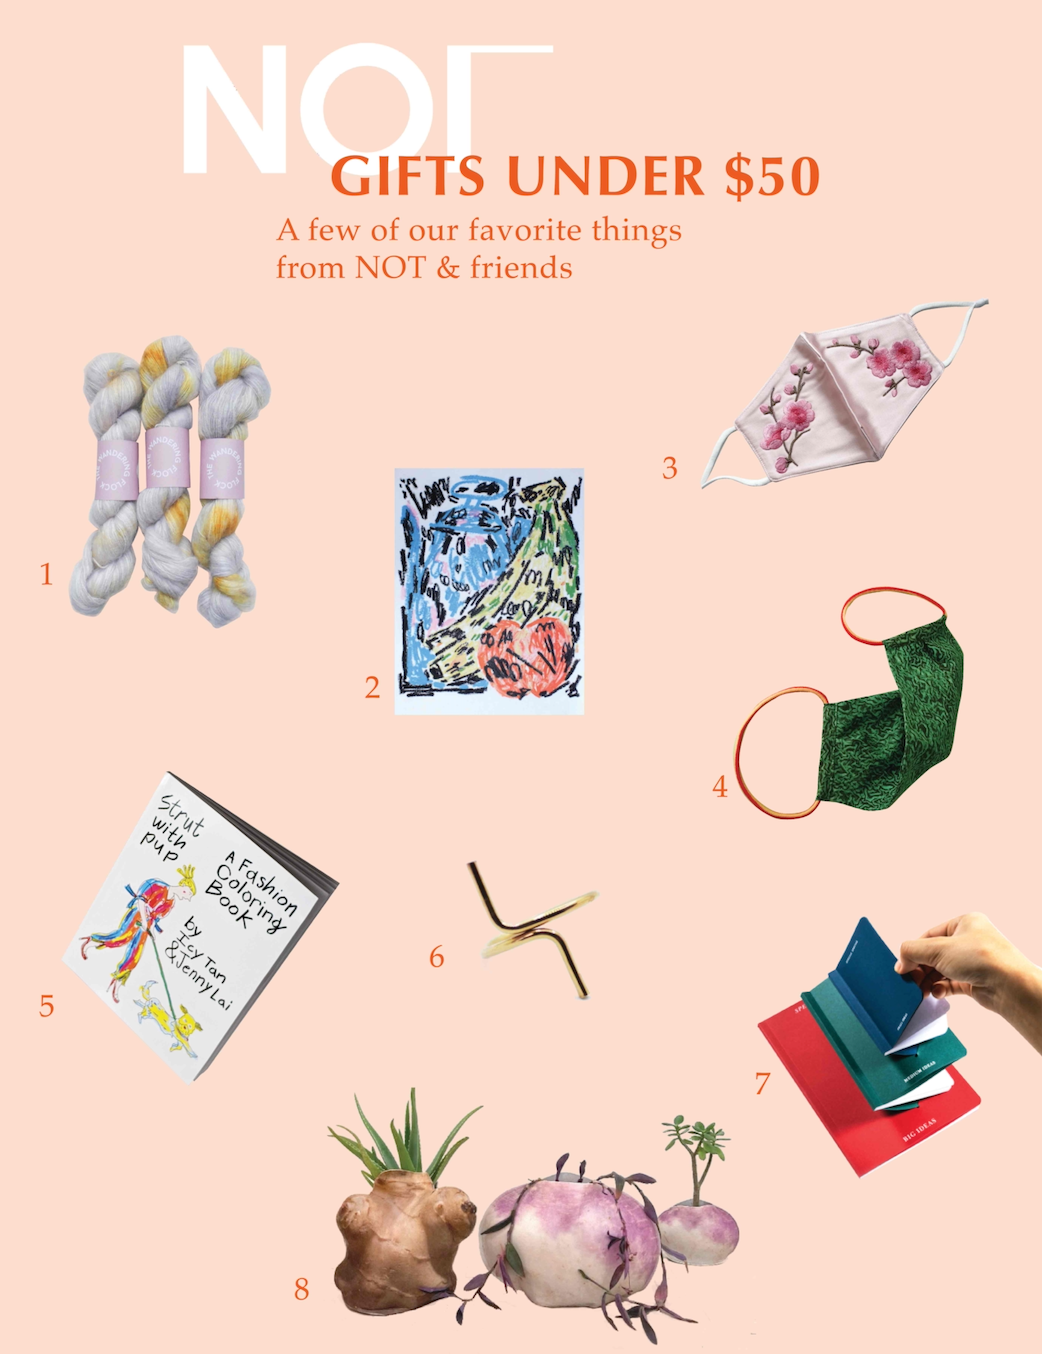 50 gifts under $50 - The Buy Guide